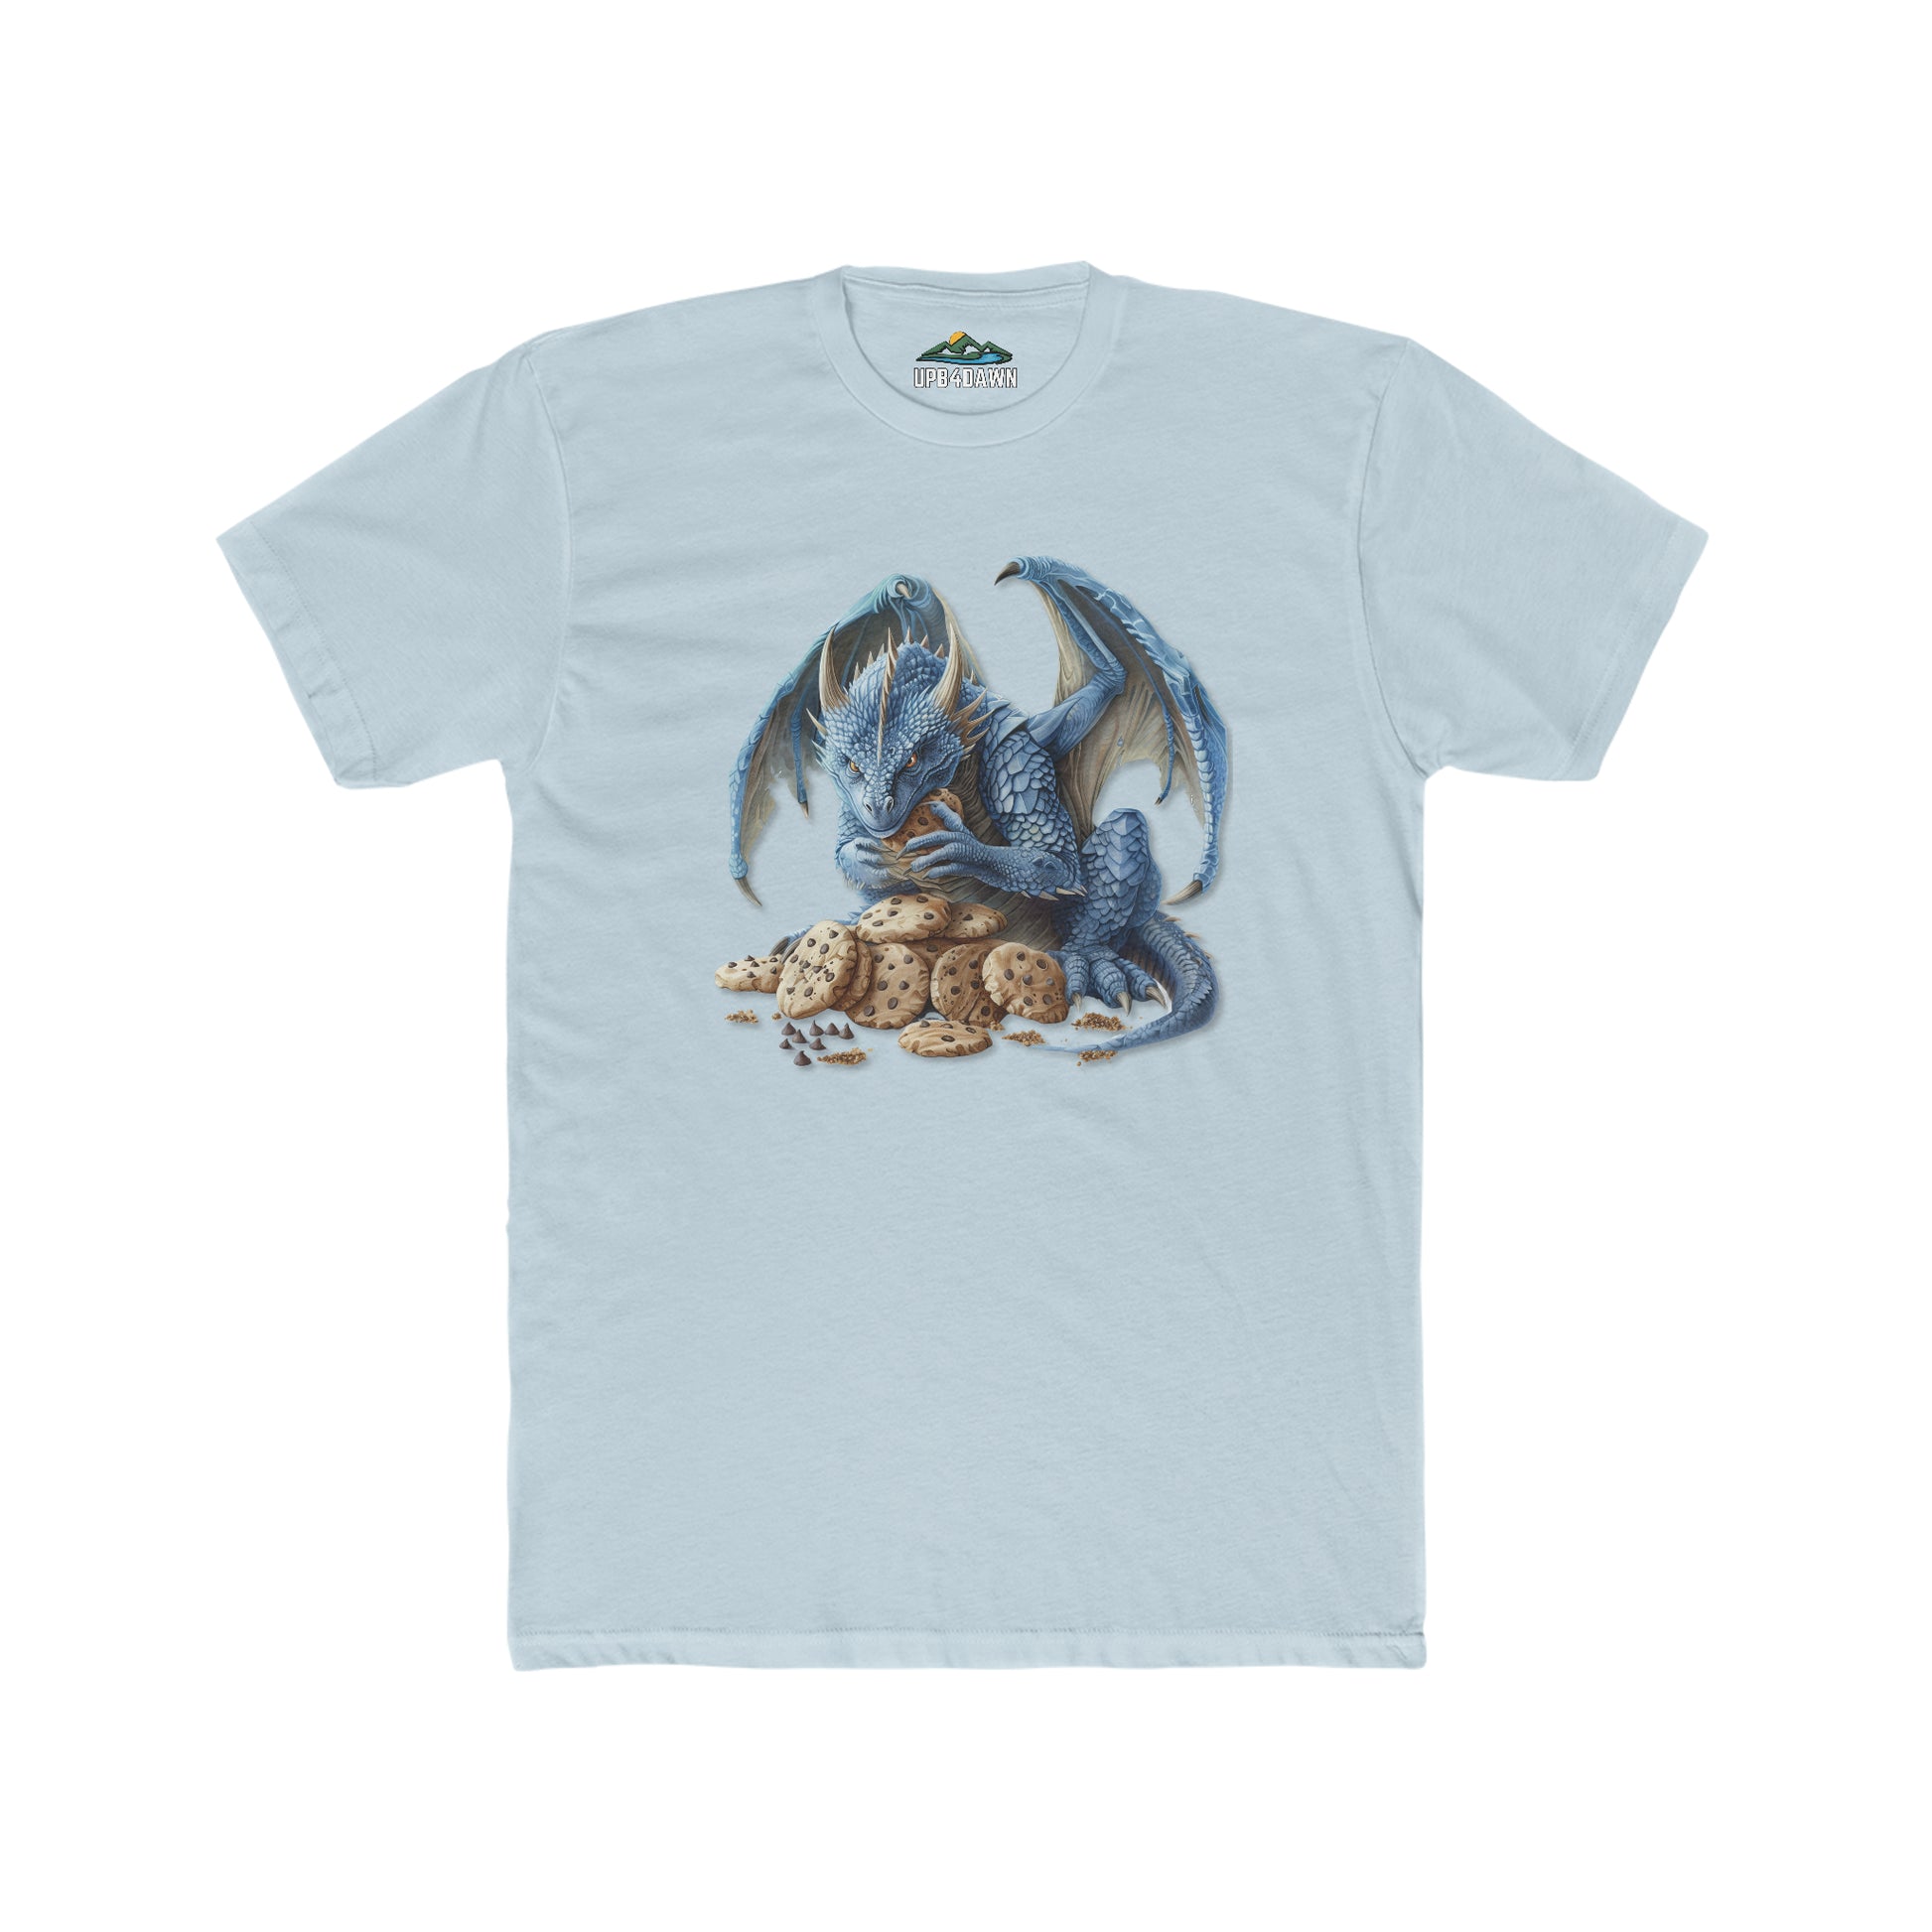 A Men's Cotton Crew Tee - Blue Dragon 2 showcasing a detailed high quality print of a blue dragon curled around a clutch of eggs, positioned in the center against a plain background.